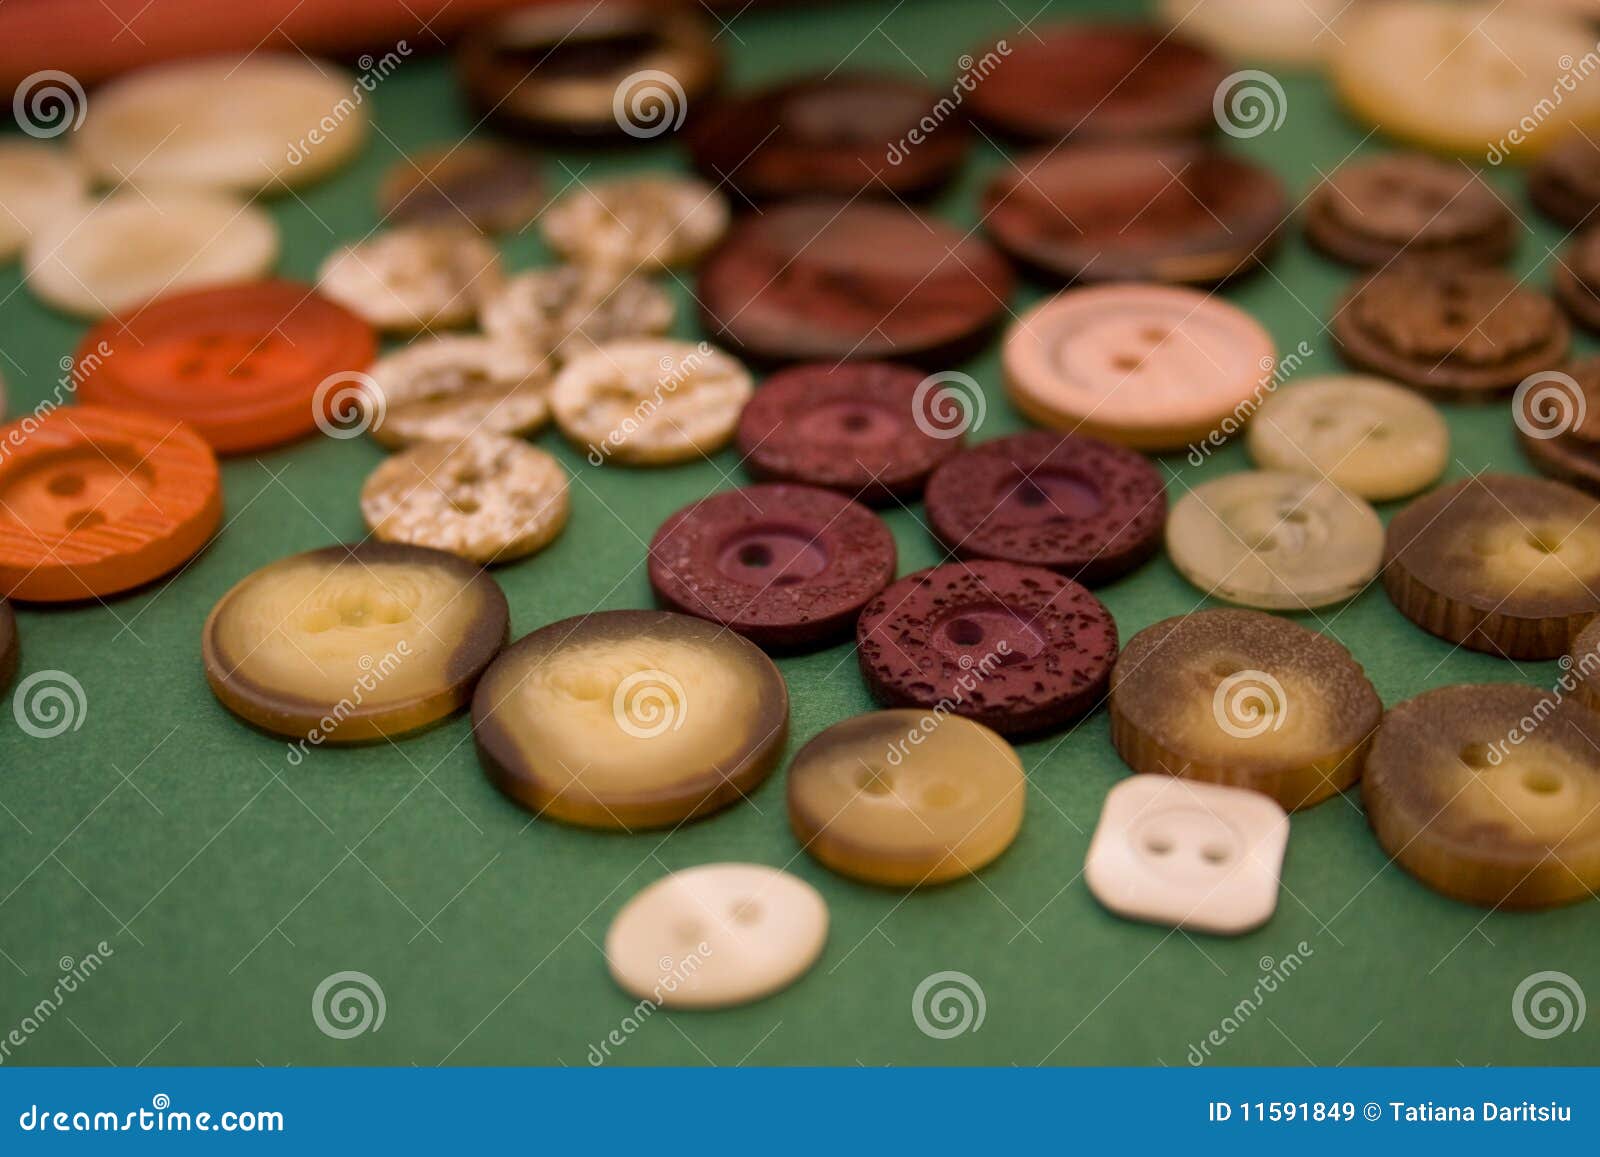 Threads, textile, buttons stock image. Image of textile - 11591849